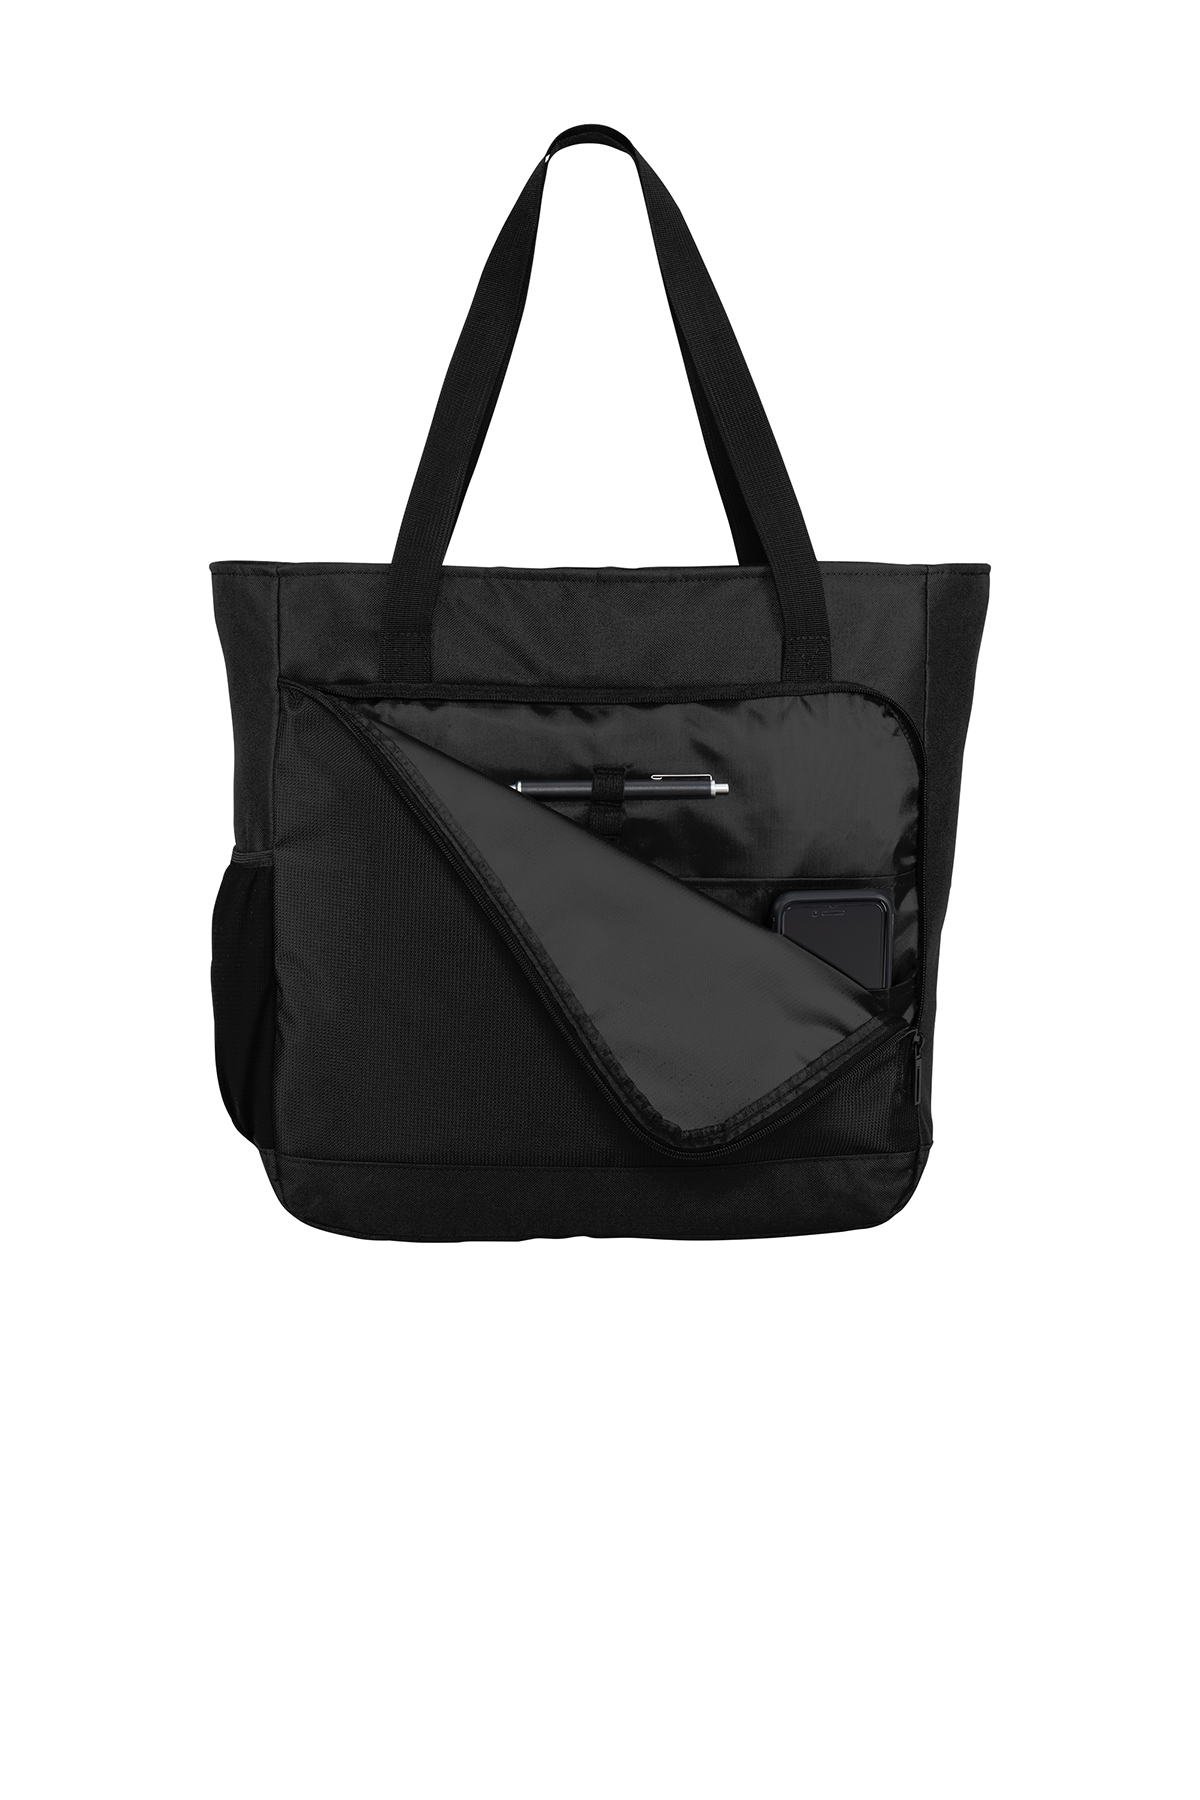 Port Authority City Tote | Product | Port Authority